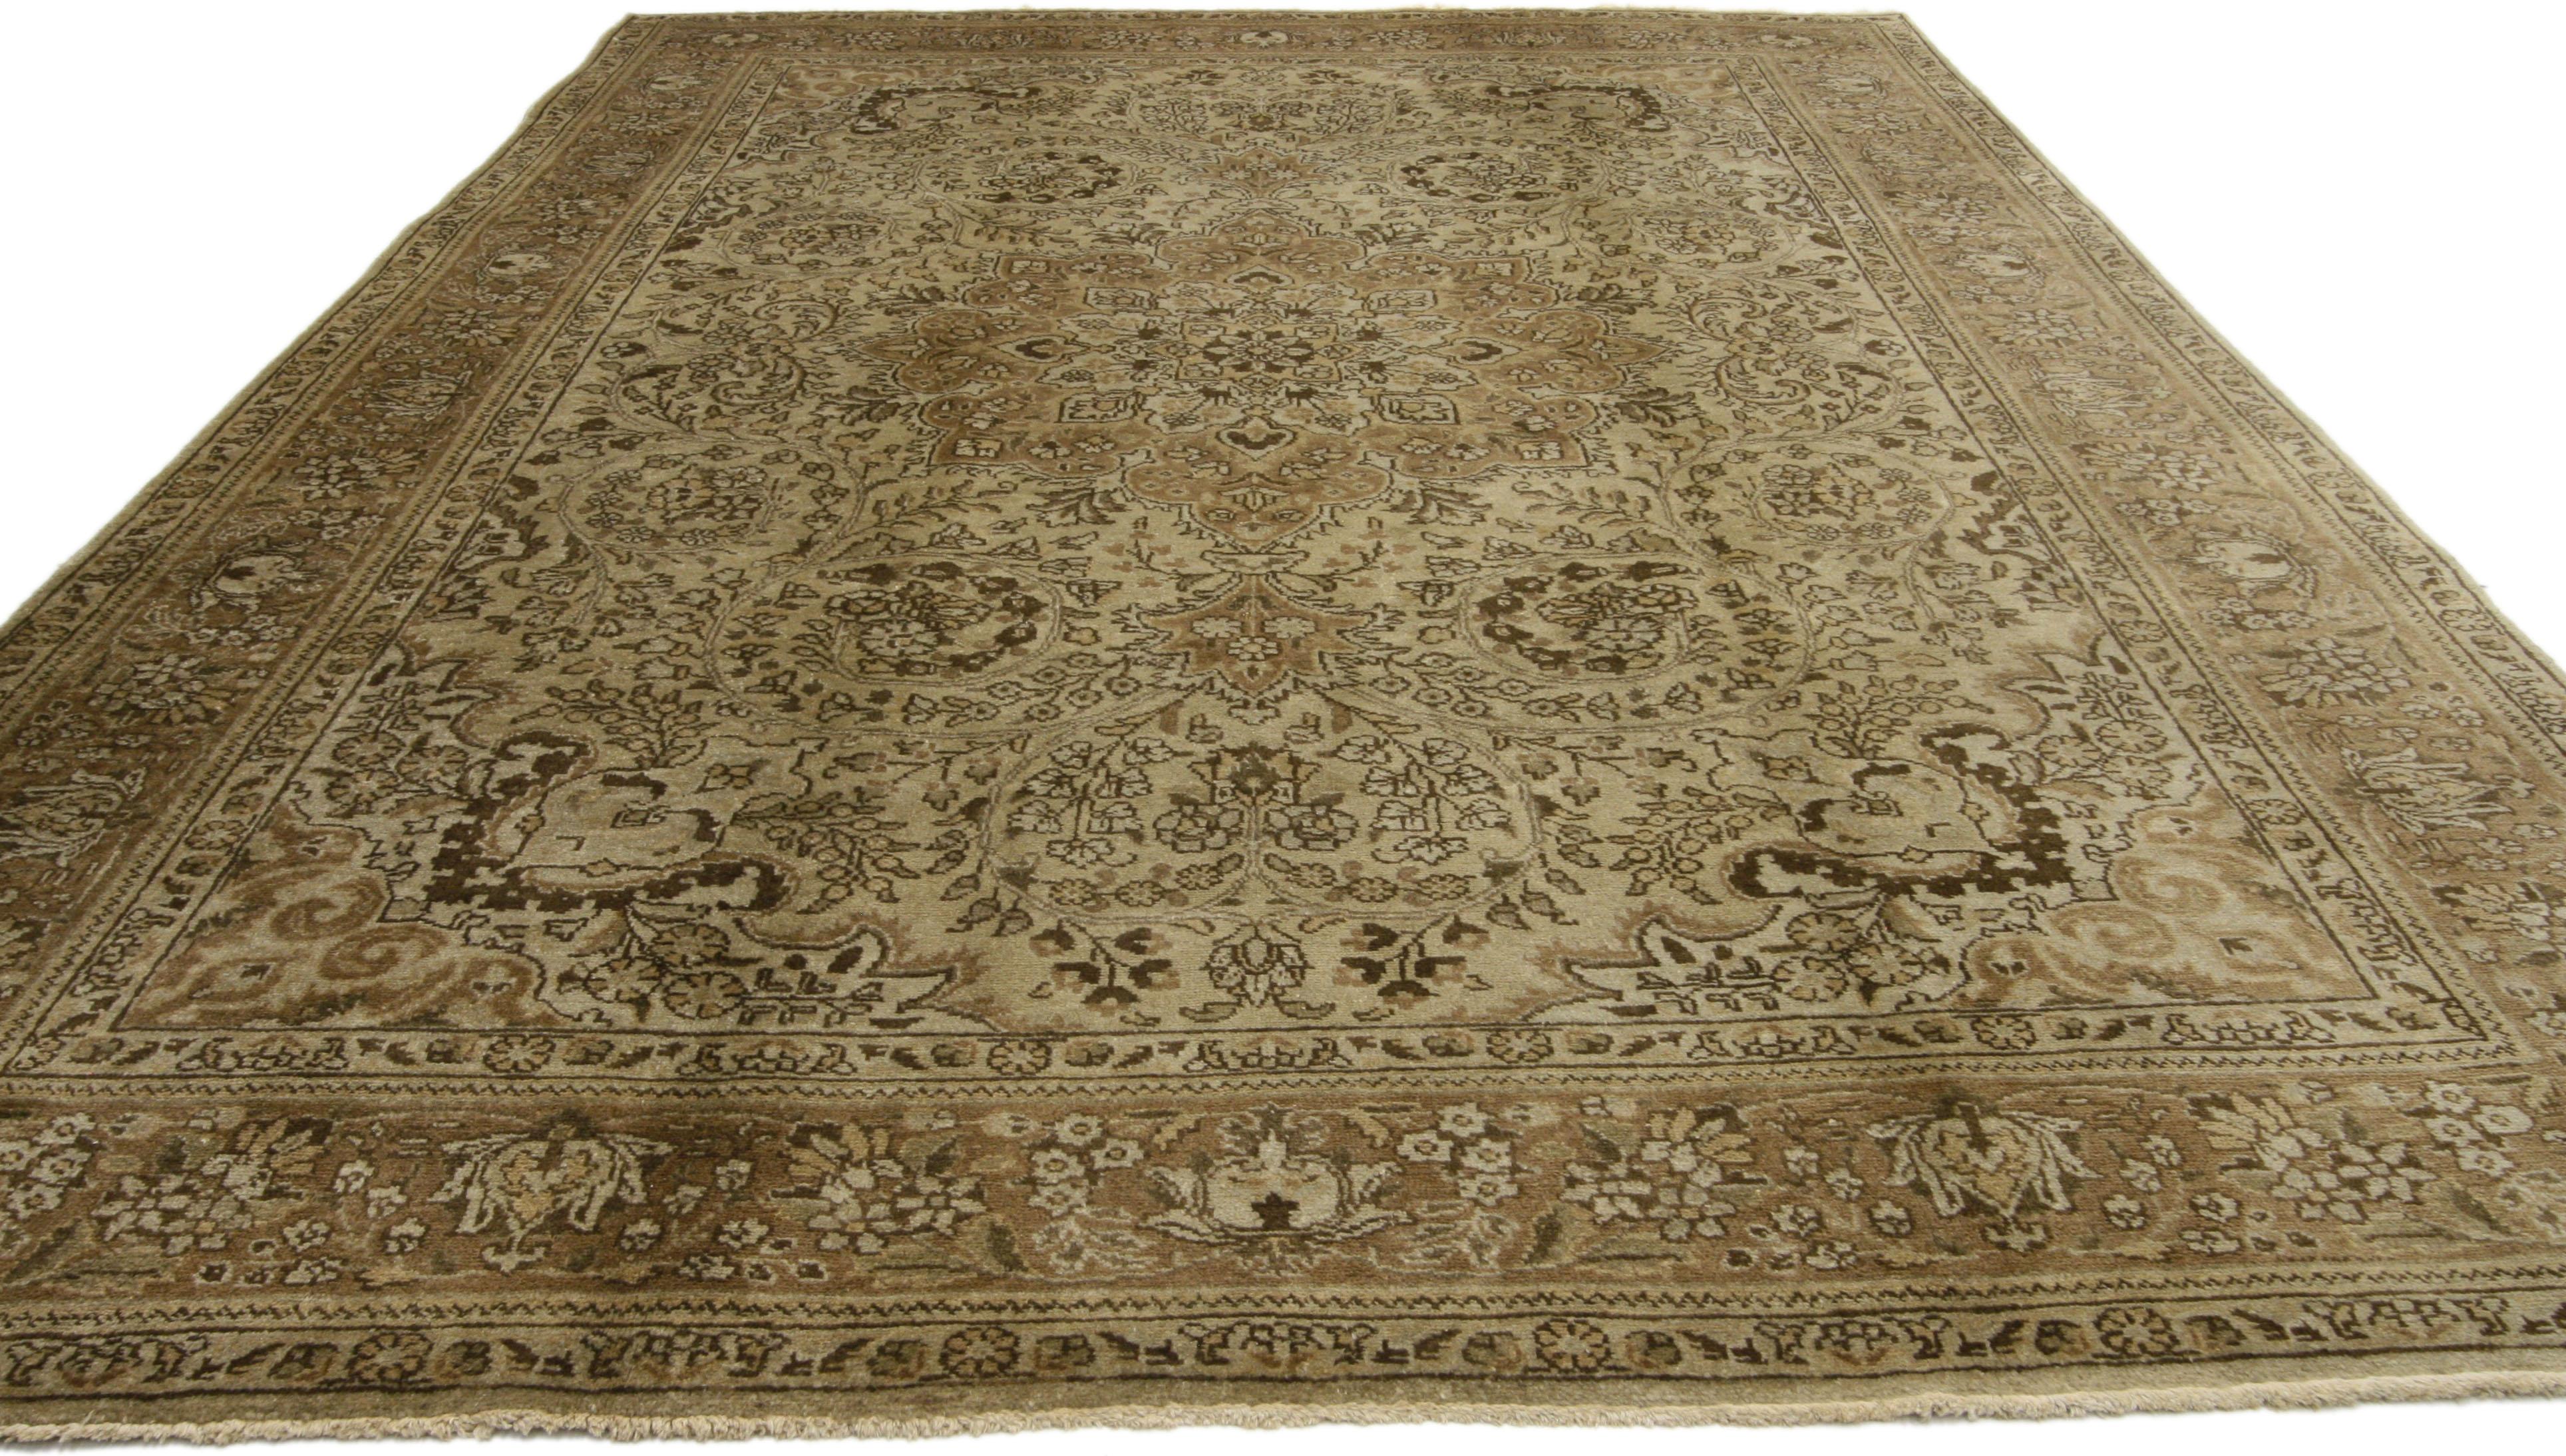 75972, vintage Persian Tabriz rug with neutral colors. Emanating grace and timeless style, this Vintage Persian Tabriz Rug features a captivating design composition in a range of neutral hues to a dazzling effect. A round floral medallion with